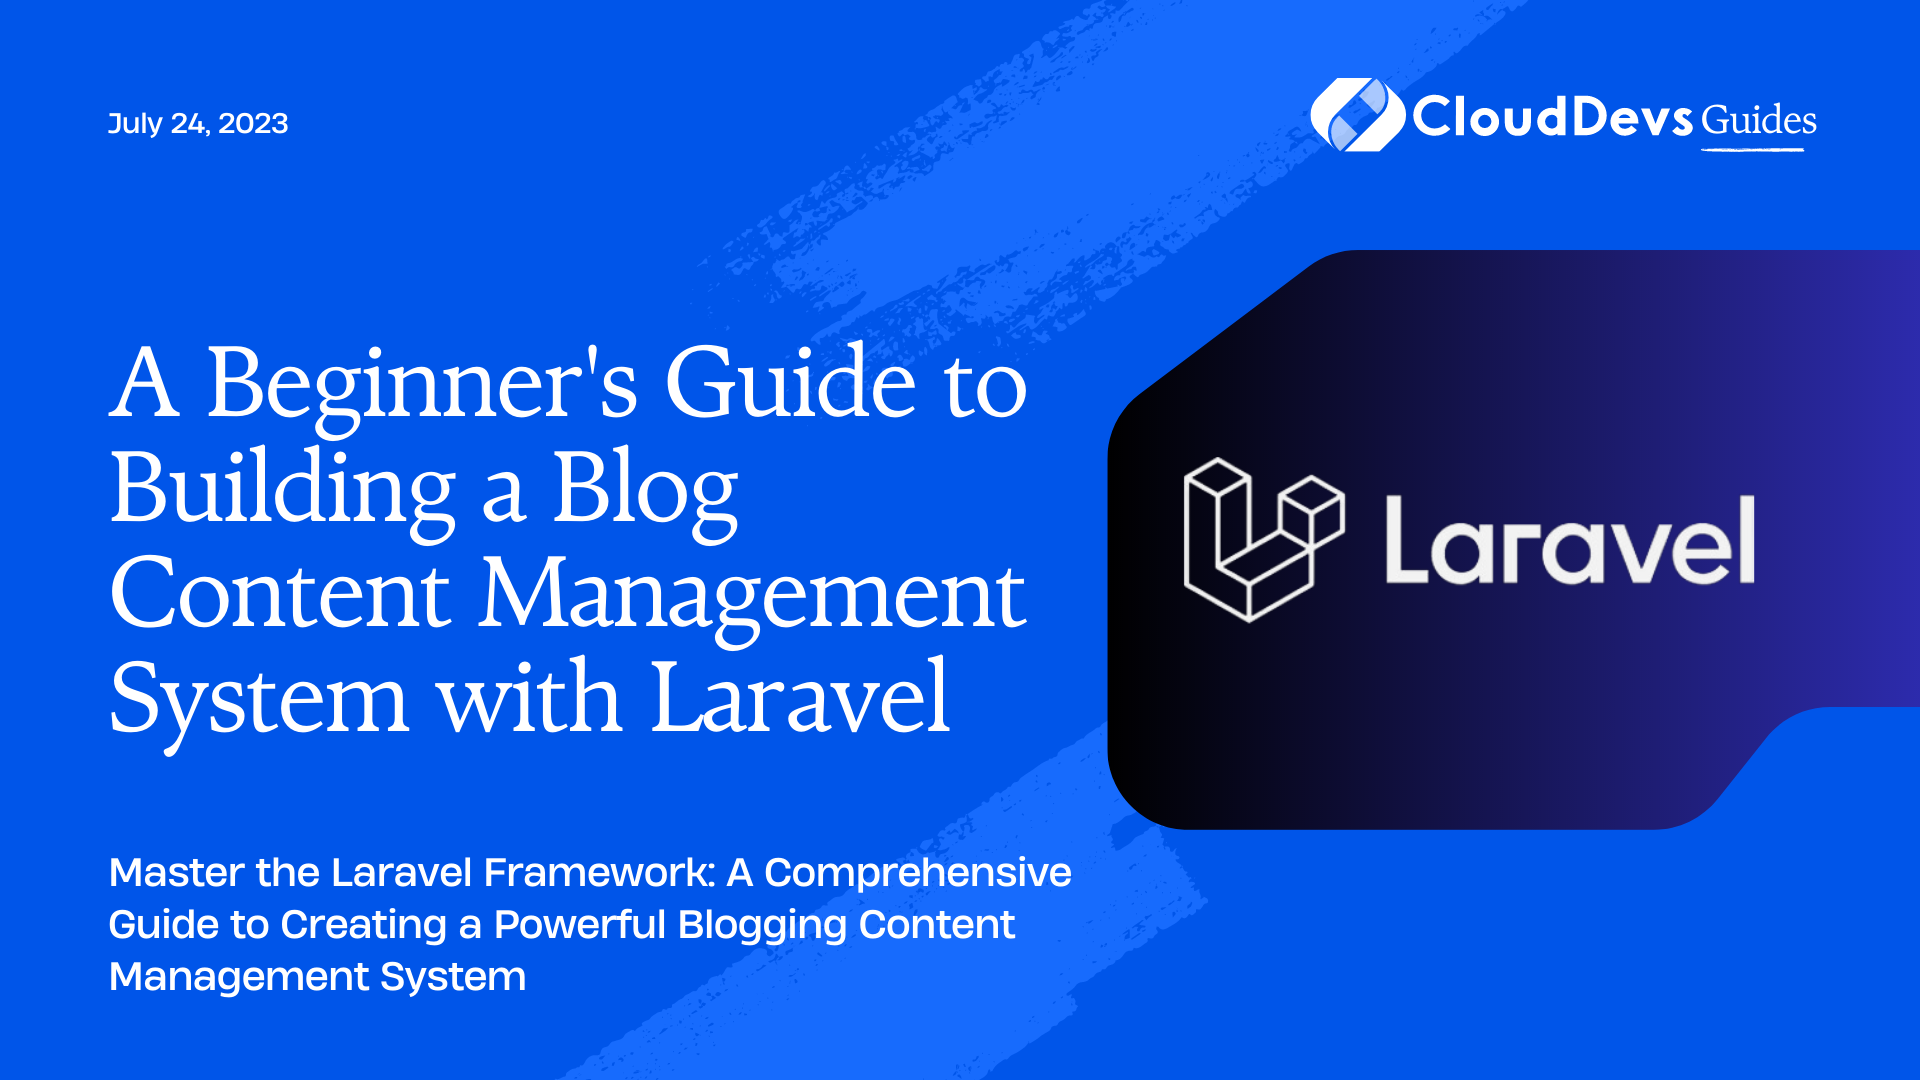 A Beginner's Guide to Building a Blog Content Management System with Laravel